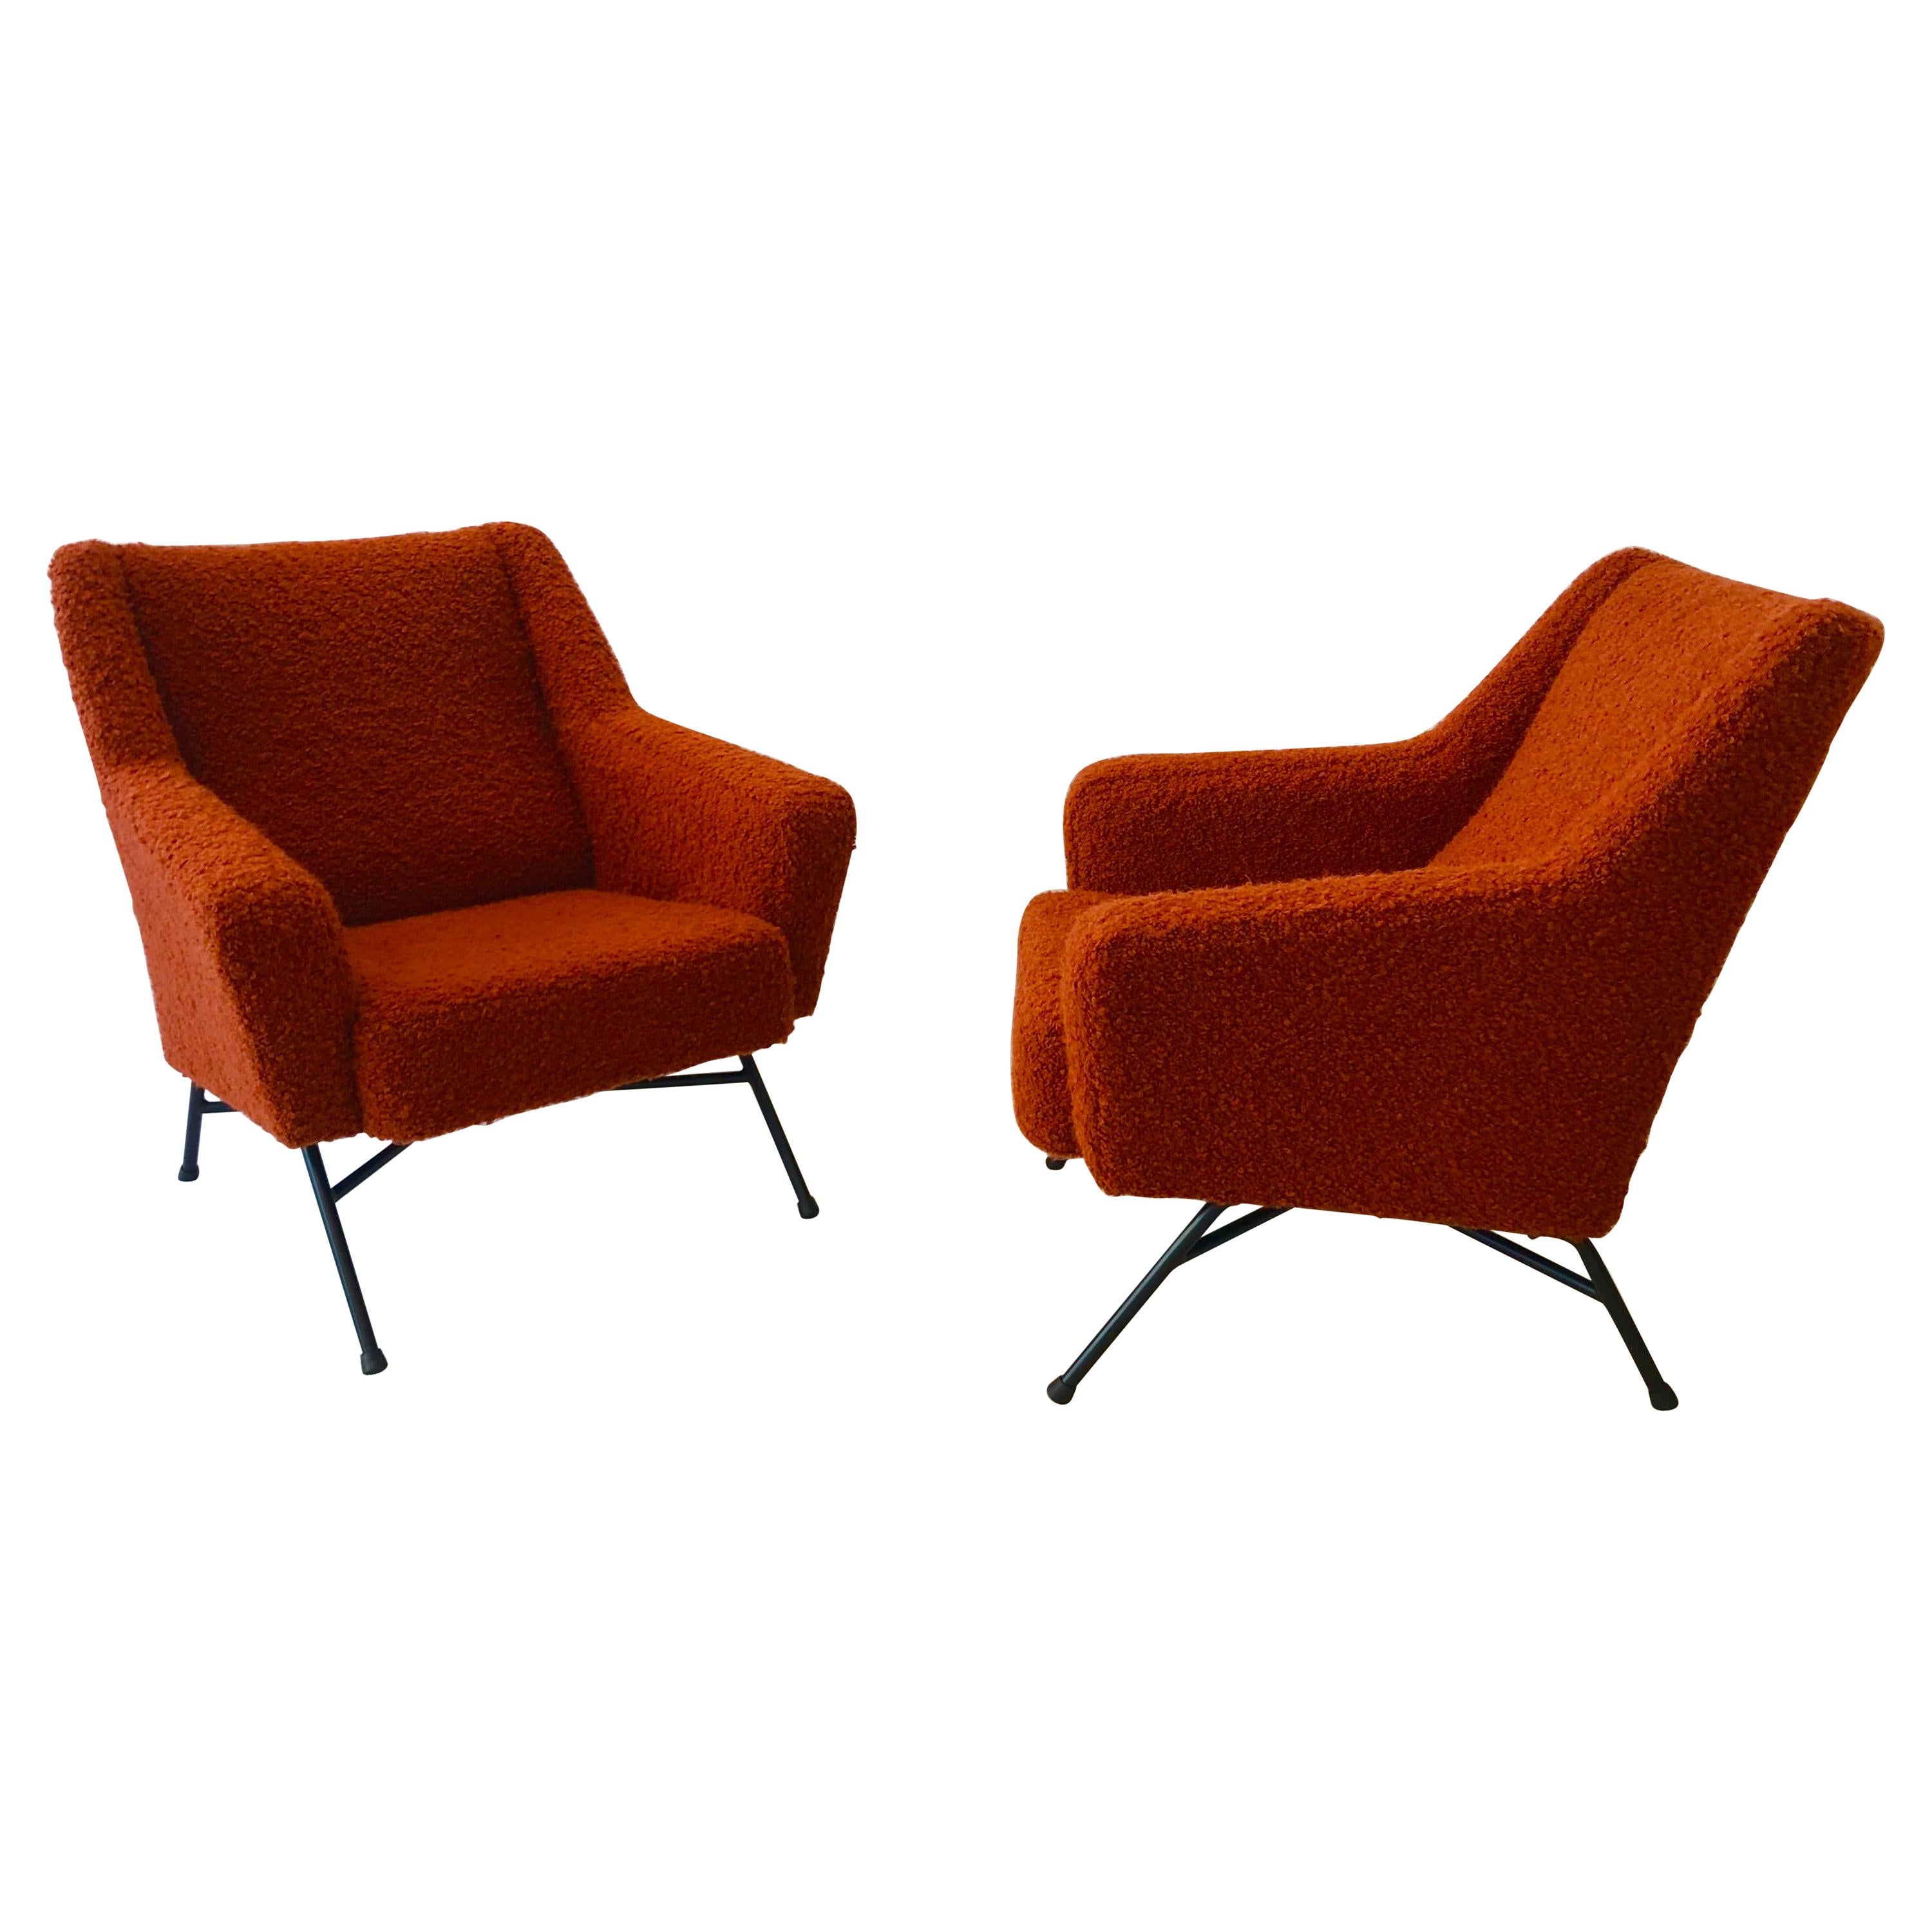 Pair of Armchairs by Dangles et Defrance 1950